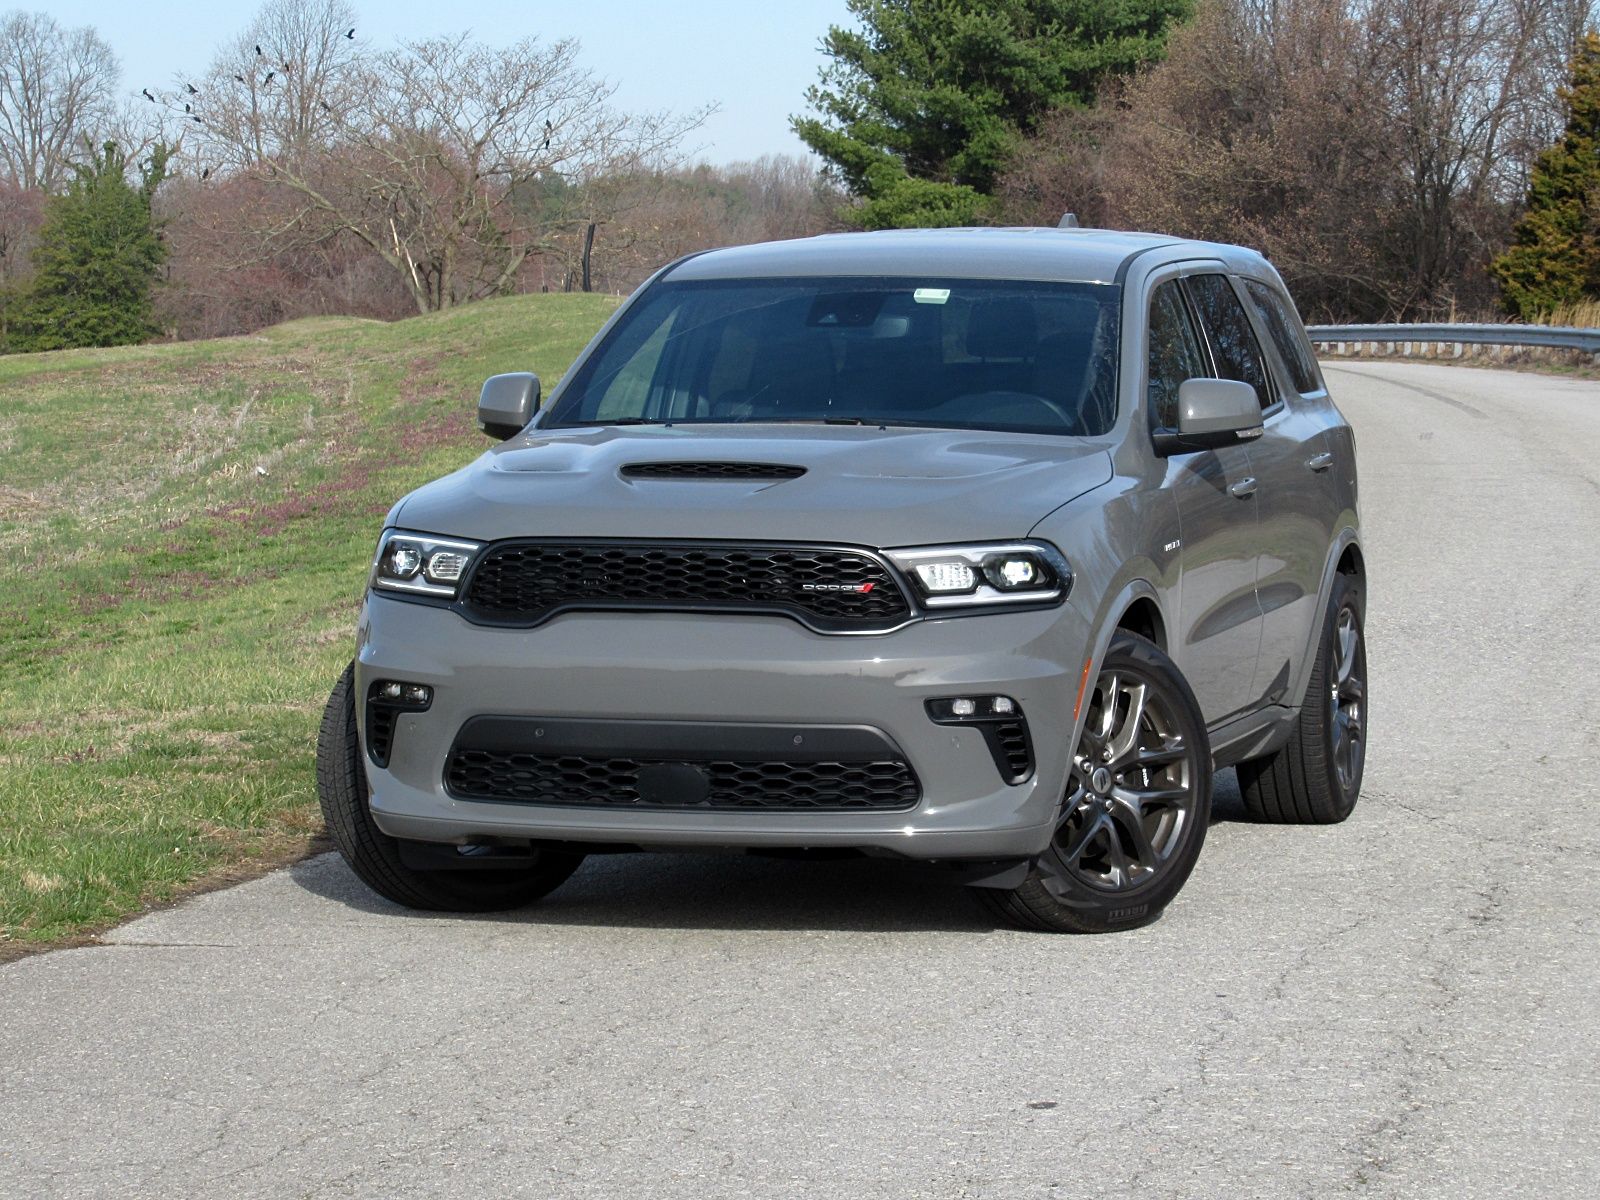 2022 2022 Dodge Durango Review: Old But Still Relevant